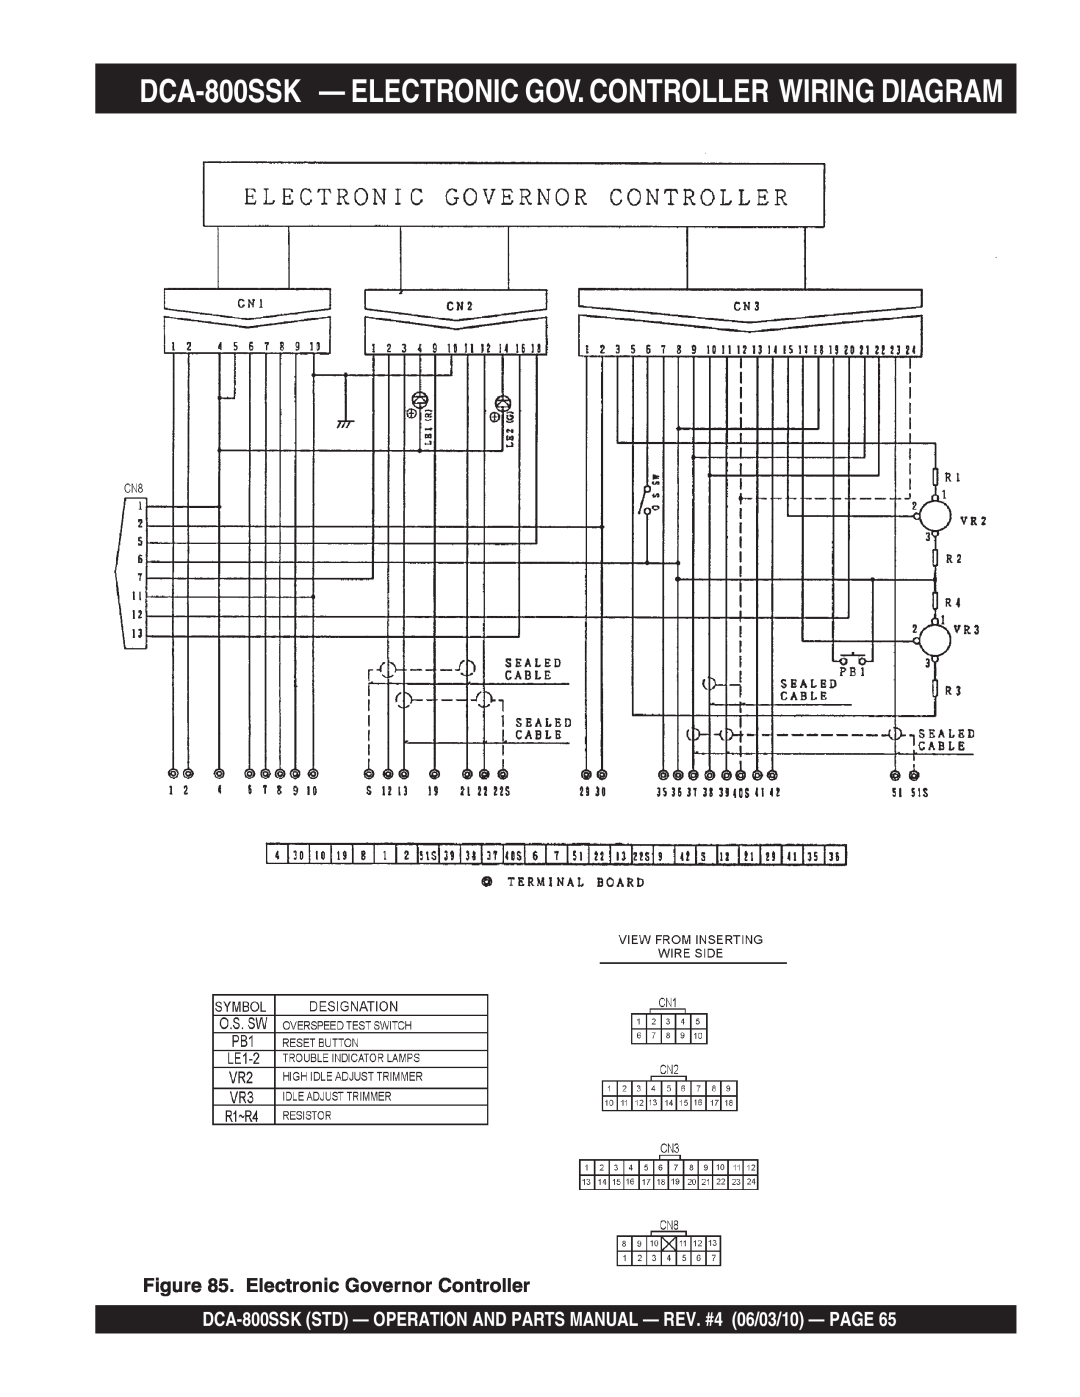 Multiquip operation manual DCA-800SSK - ELECTRONIC GOV. CONTROLLER WIRING DIAGRAM, Electronic Governor Controller 